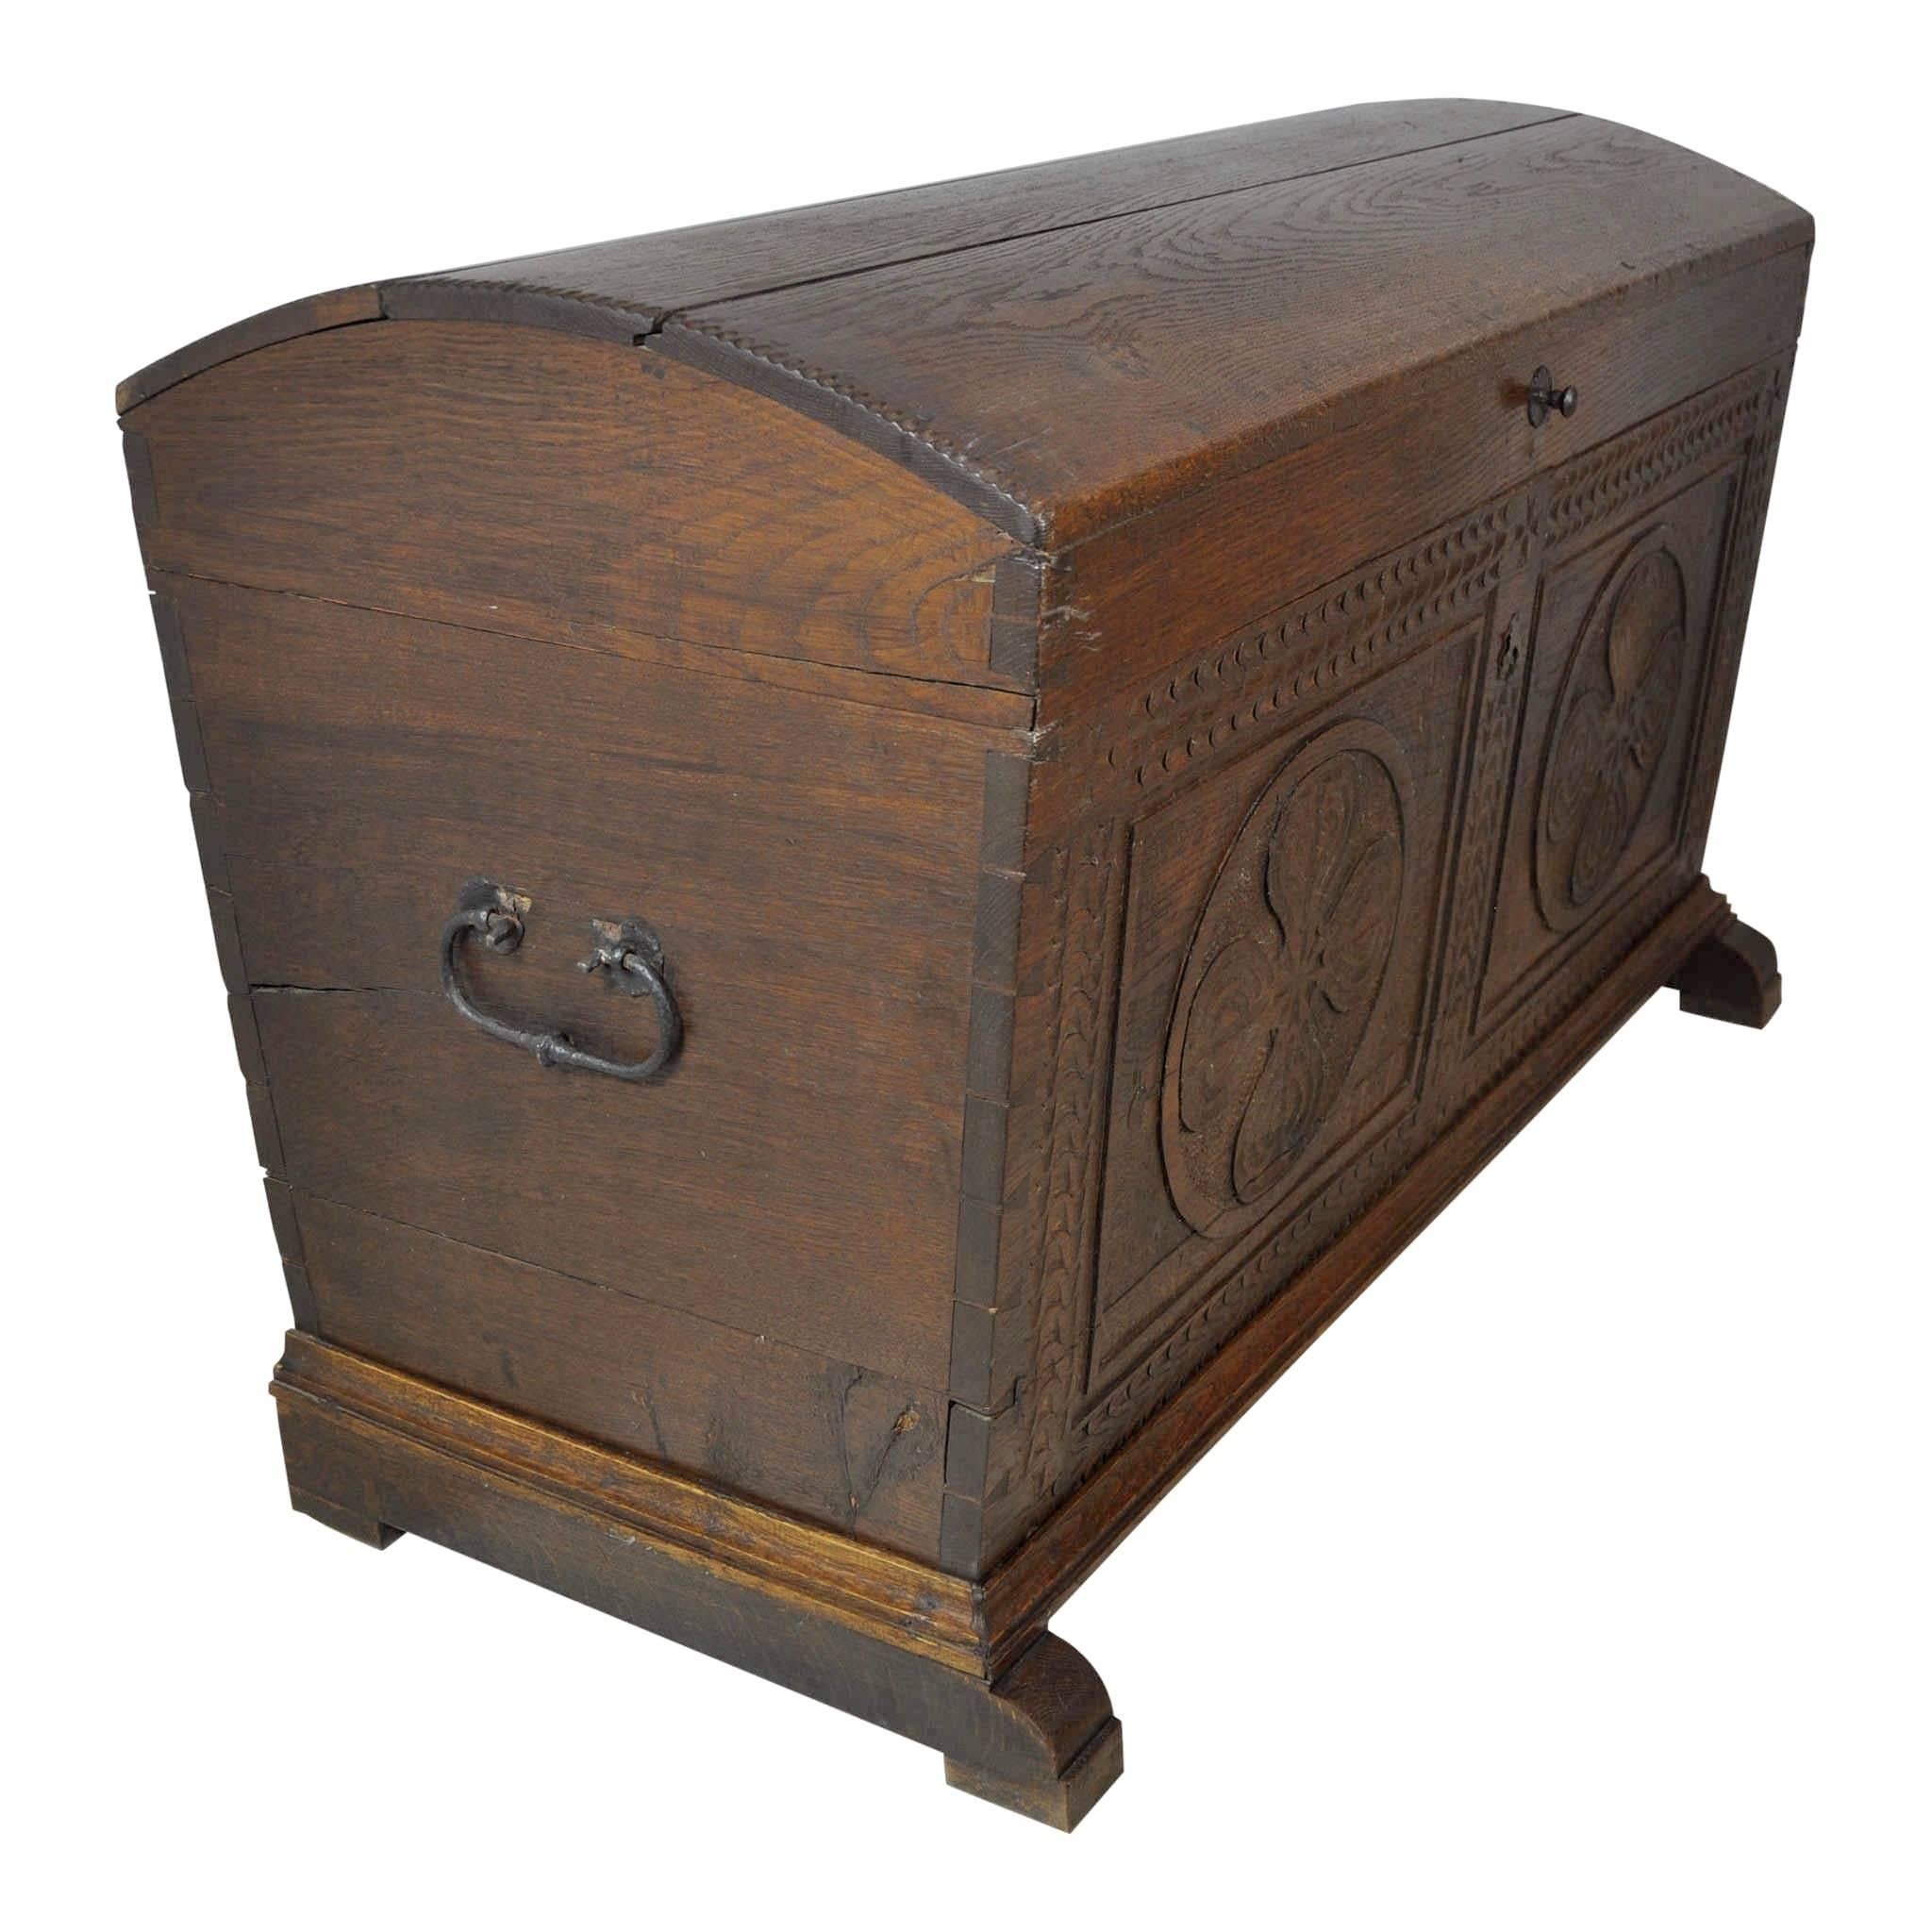 The front of this domed oak trunk features two panels with relief carvings of circles enclosing quatrefoils. The trunk's corners feature exposed dove tailed joinery and the domed top with its double rabbet joints and wooden pins adds to the charm of